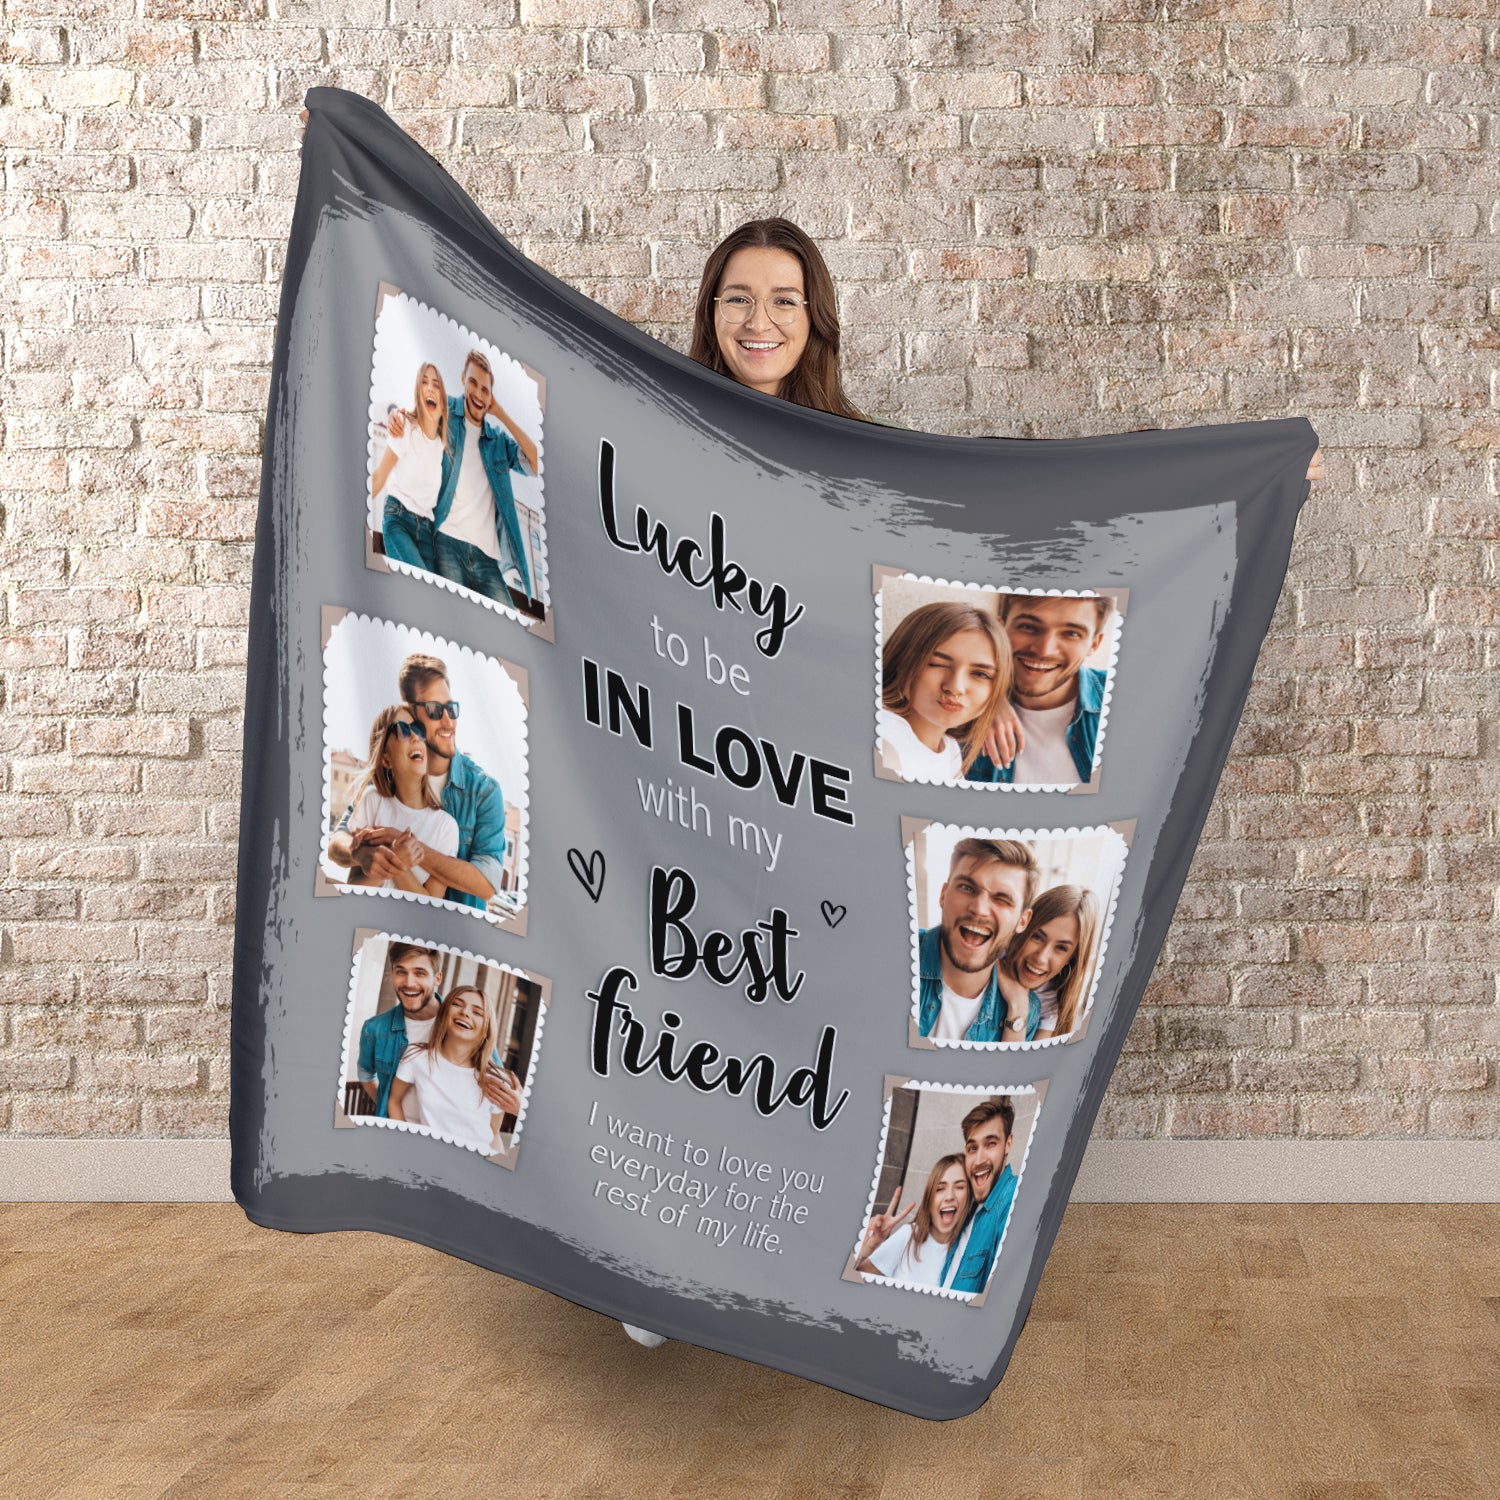 Personalised Lucky To Be In Love With - 150 x 150cm Fleece Blanket